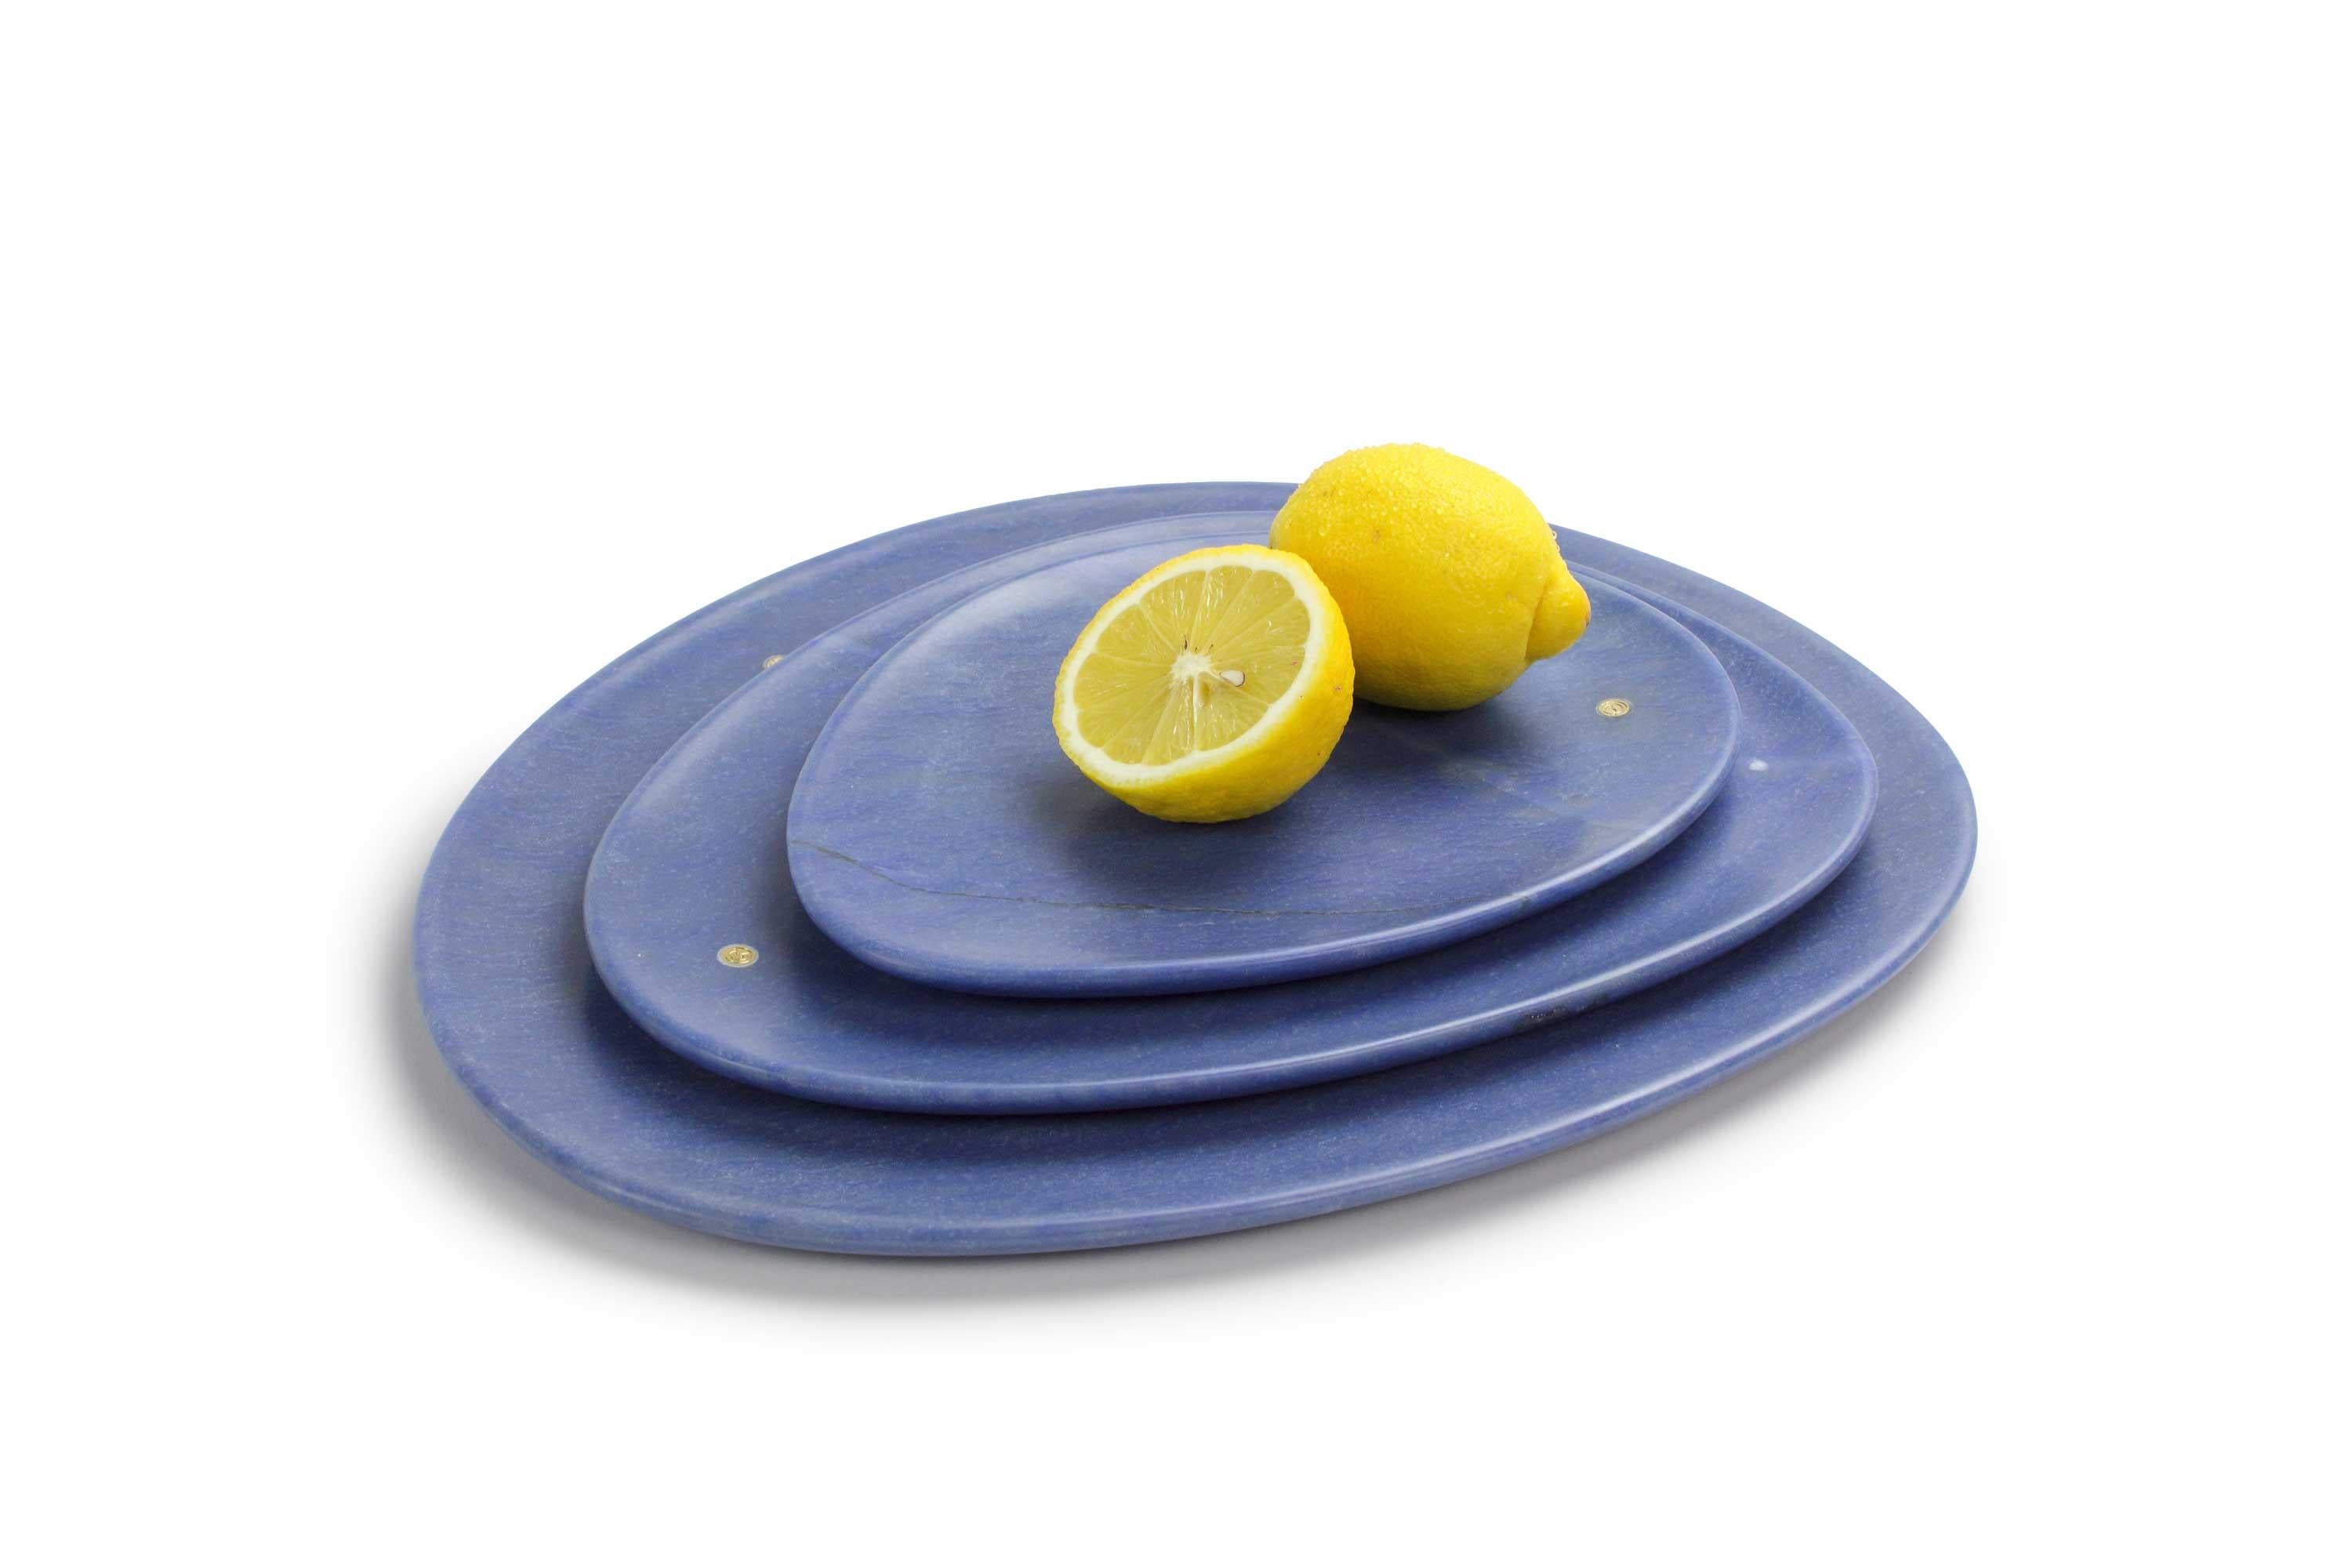 Hand carved presentation plates in semi-precious quartzite Azul Macaubas.
Multiple use as plates, platters and placers. 

Dimensions: Small L 24, W 20, H 1.8 cm, medium L 30, W 28, H 1.8 cm and big L 36, W 35, H 1.8 cm.
Available in different